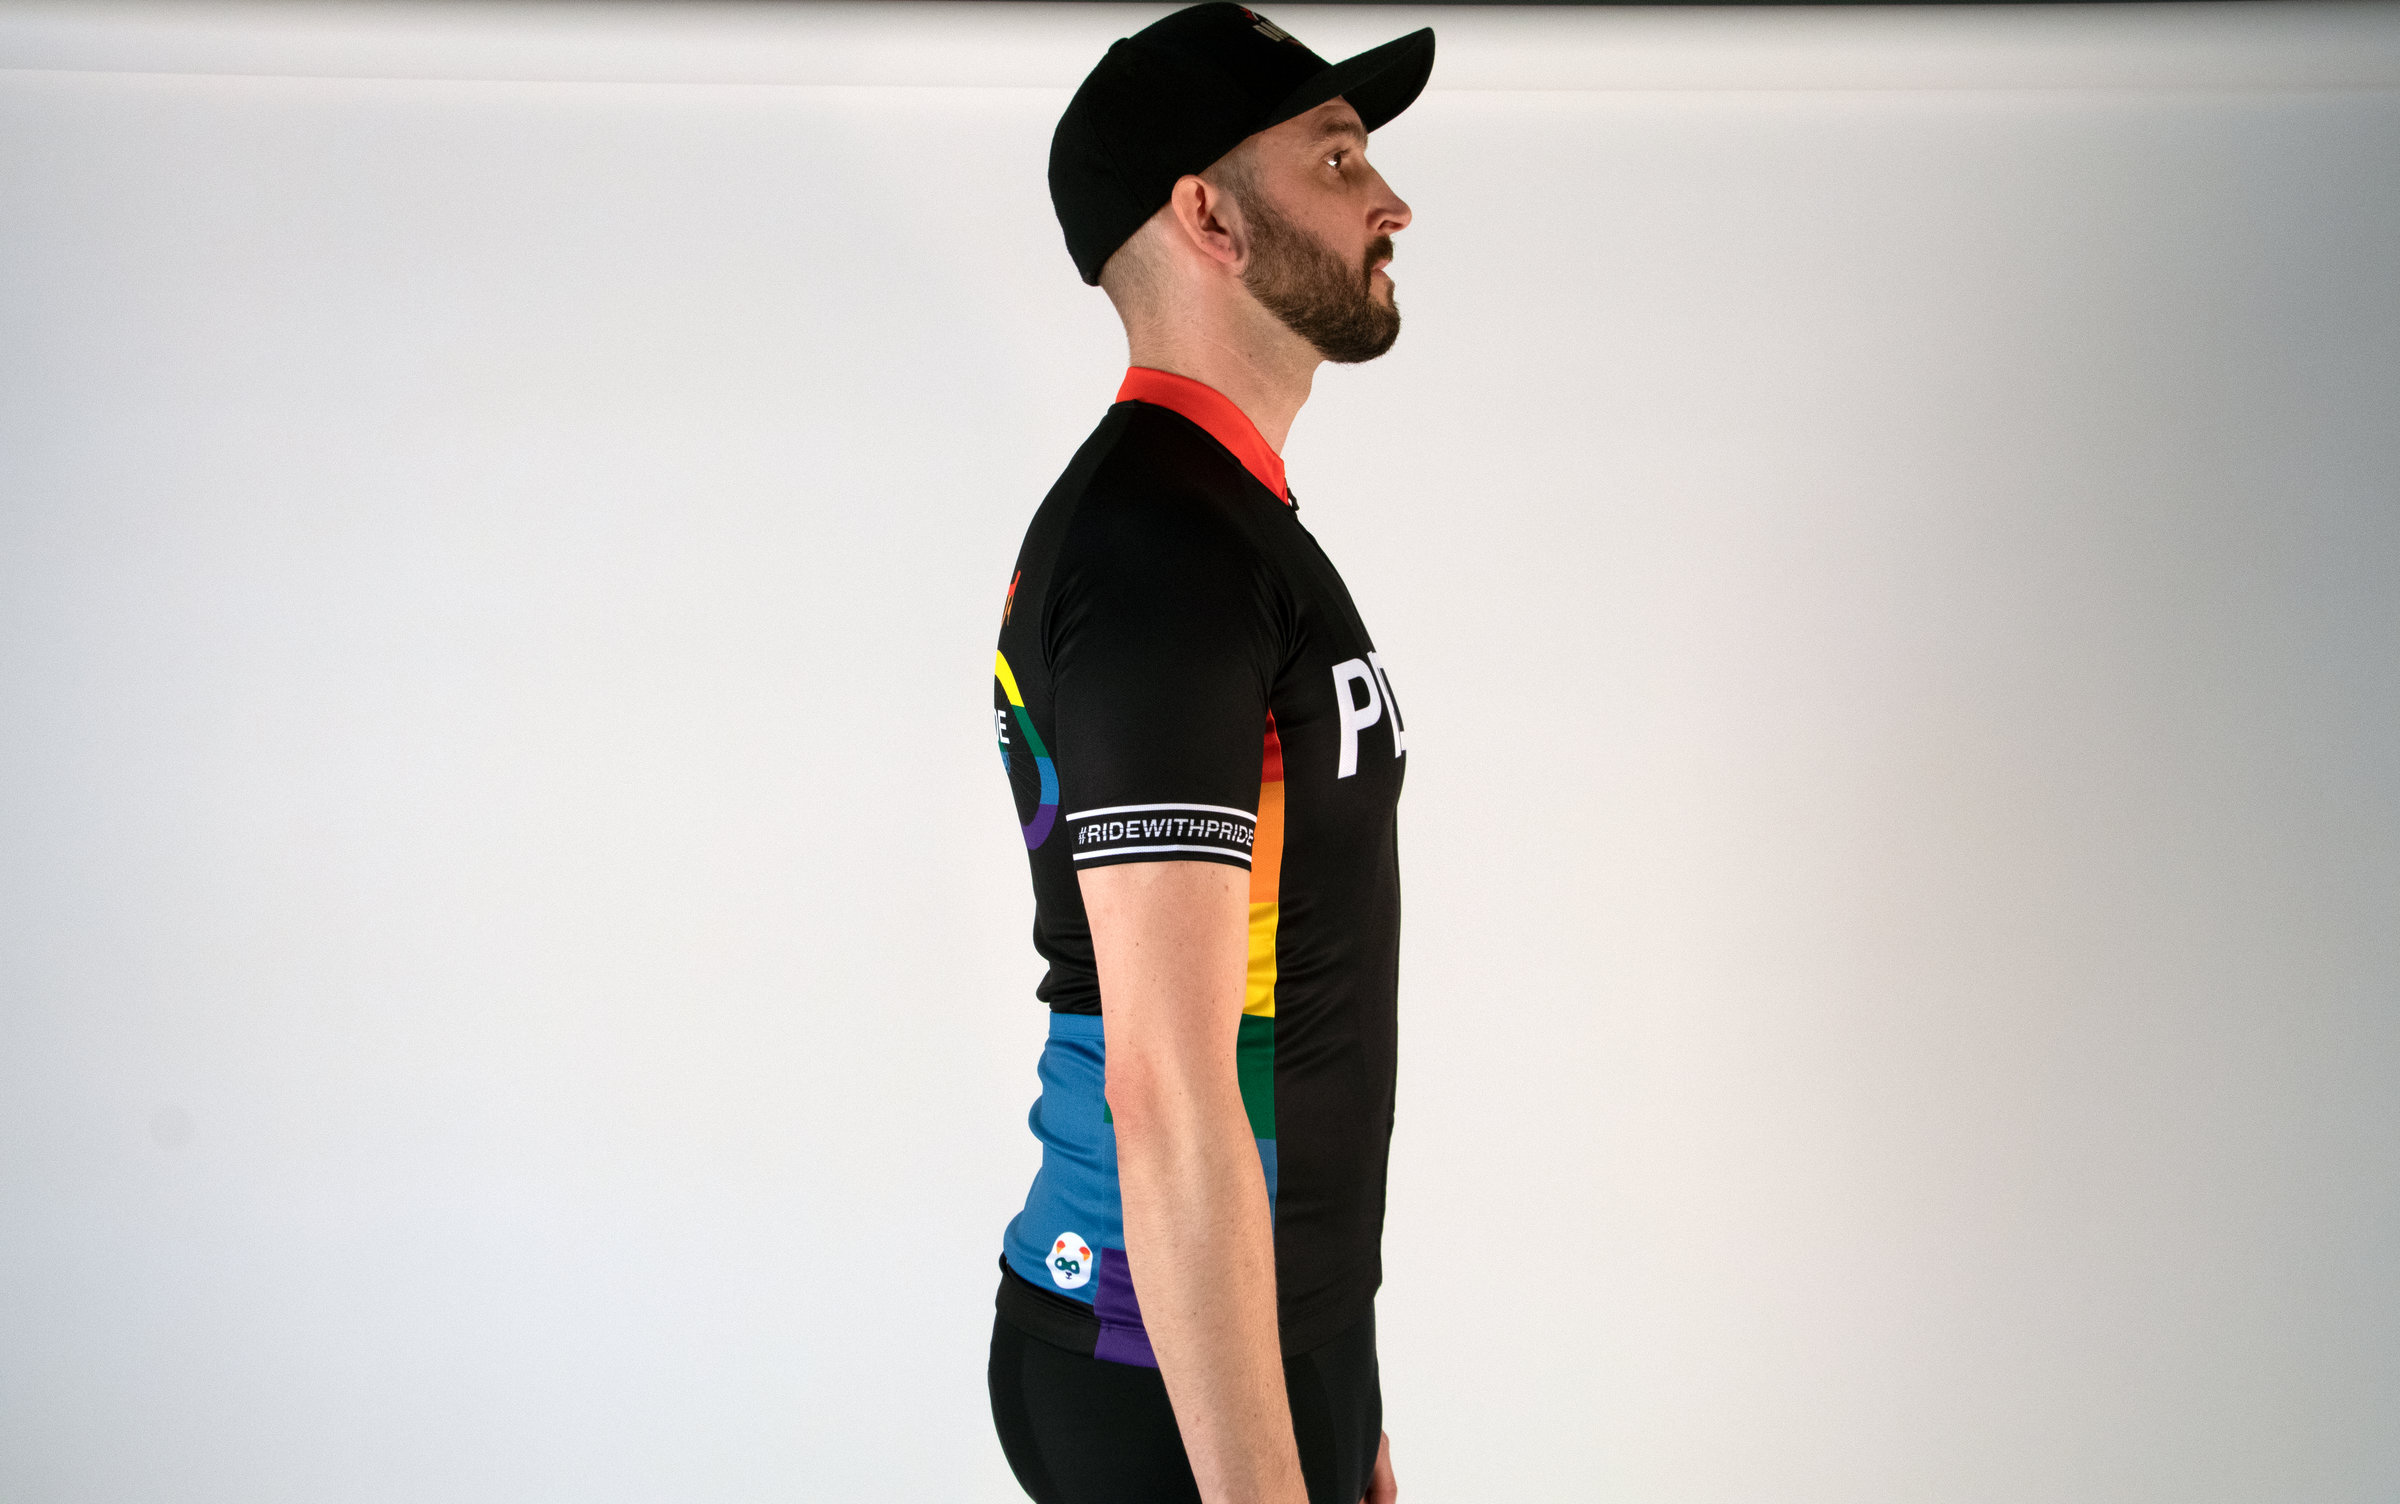 Ride with Pride Jersey